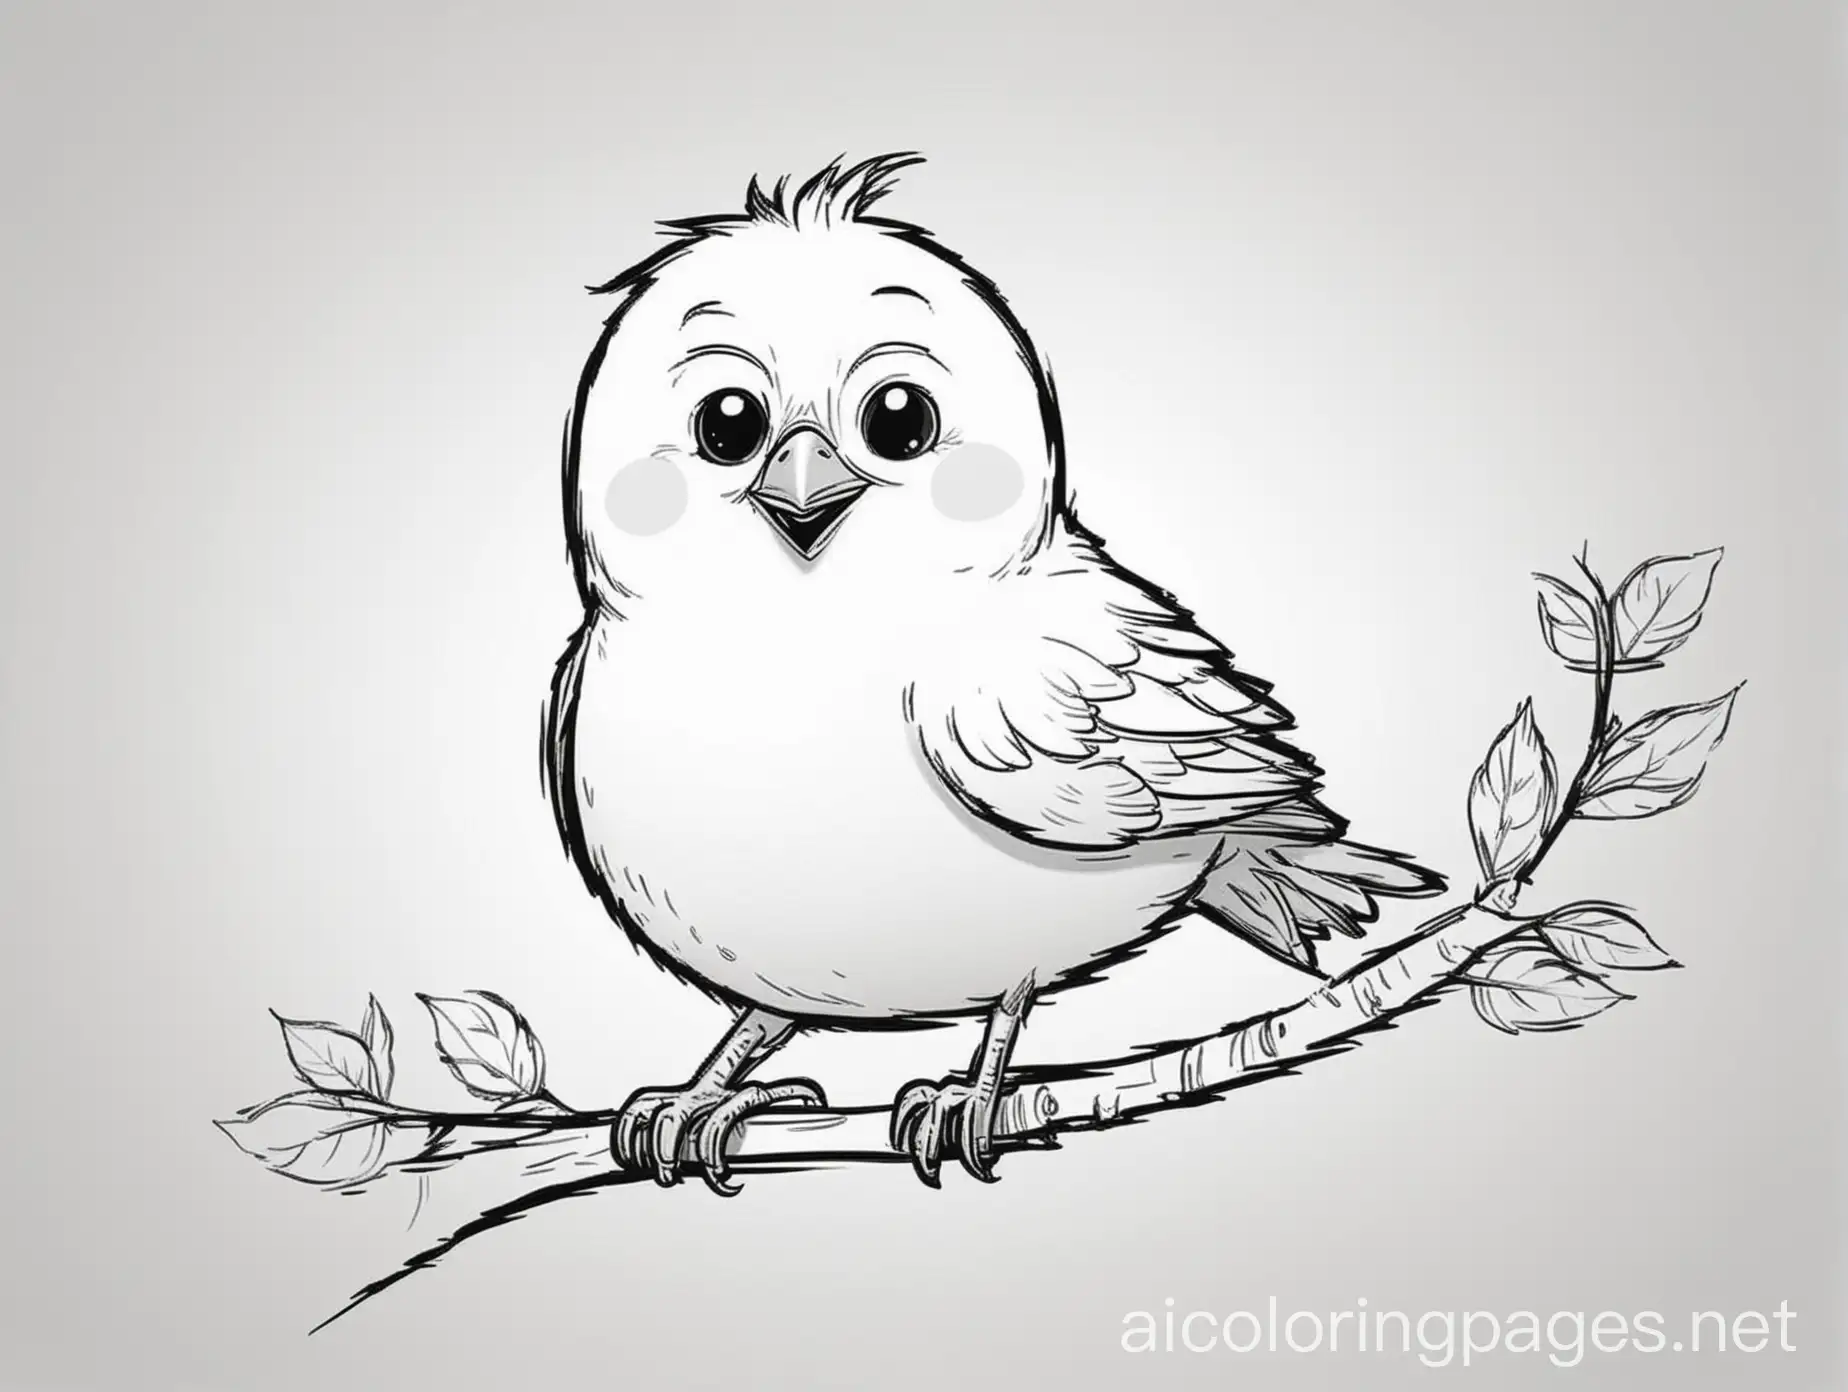 happy cartoon bird
, Coloring Page, black and white, line art, white background, Simplicity, Ample White Space. The background of the coloring page is plain white to make it easy for young children to color within the lines. The outlines of all the subjects are easy to distinguish, making it simple for kids to color without too much difficulty